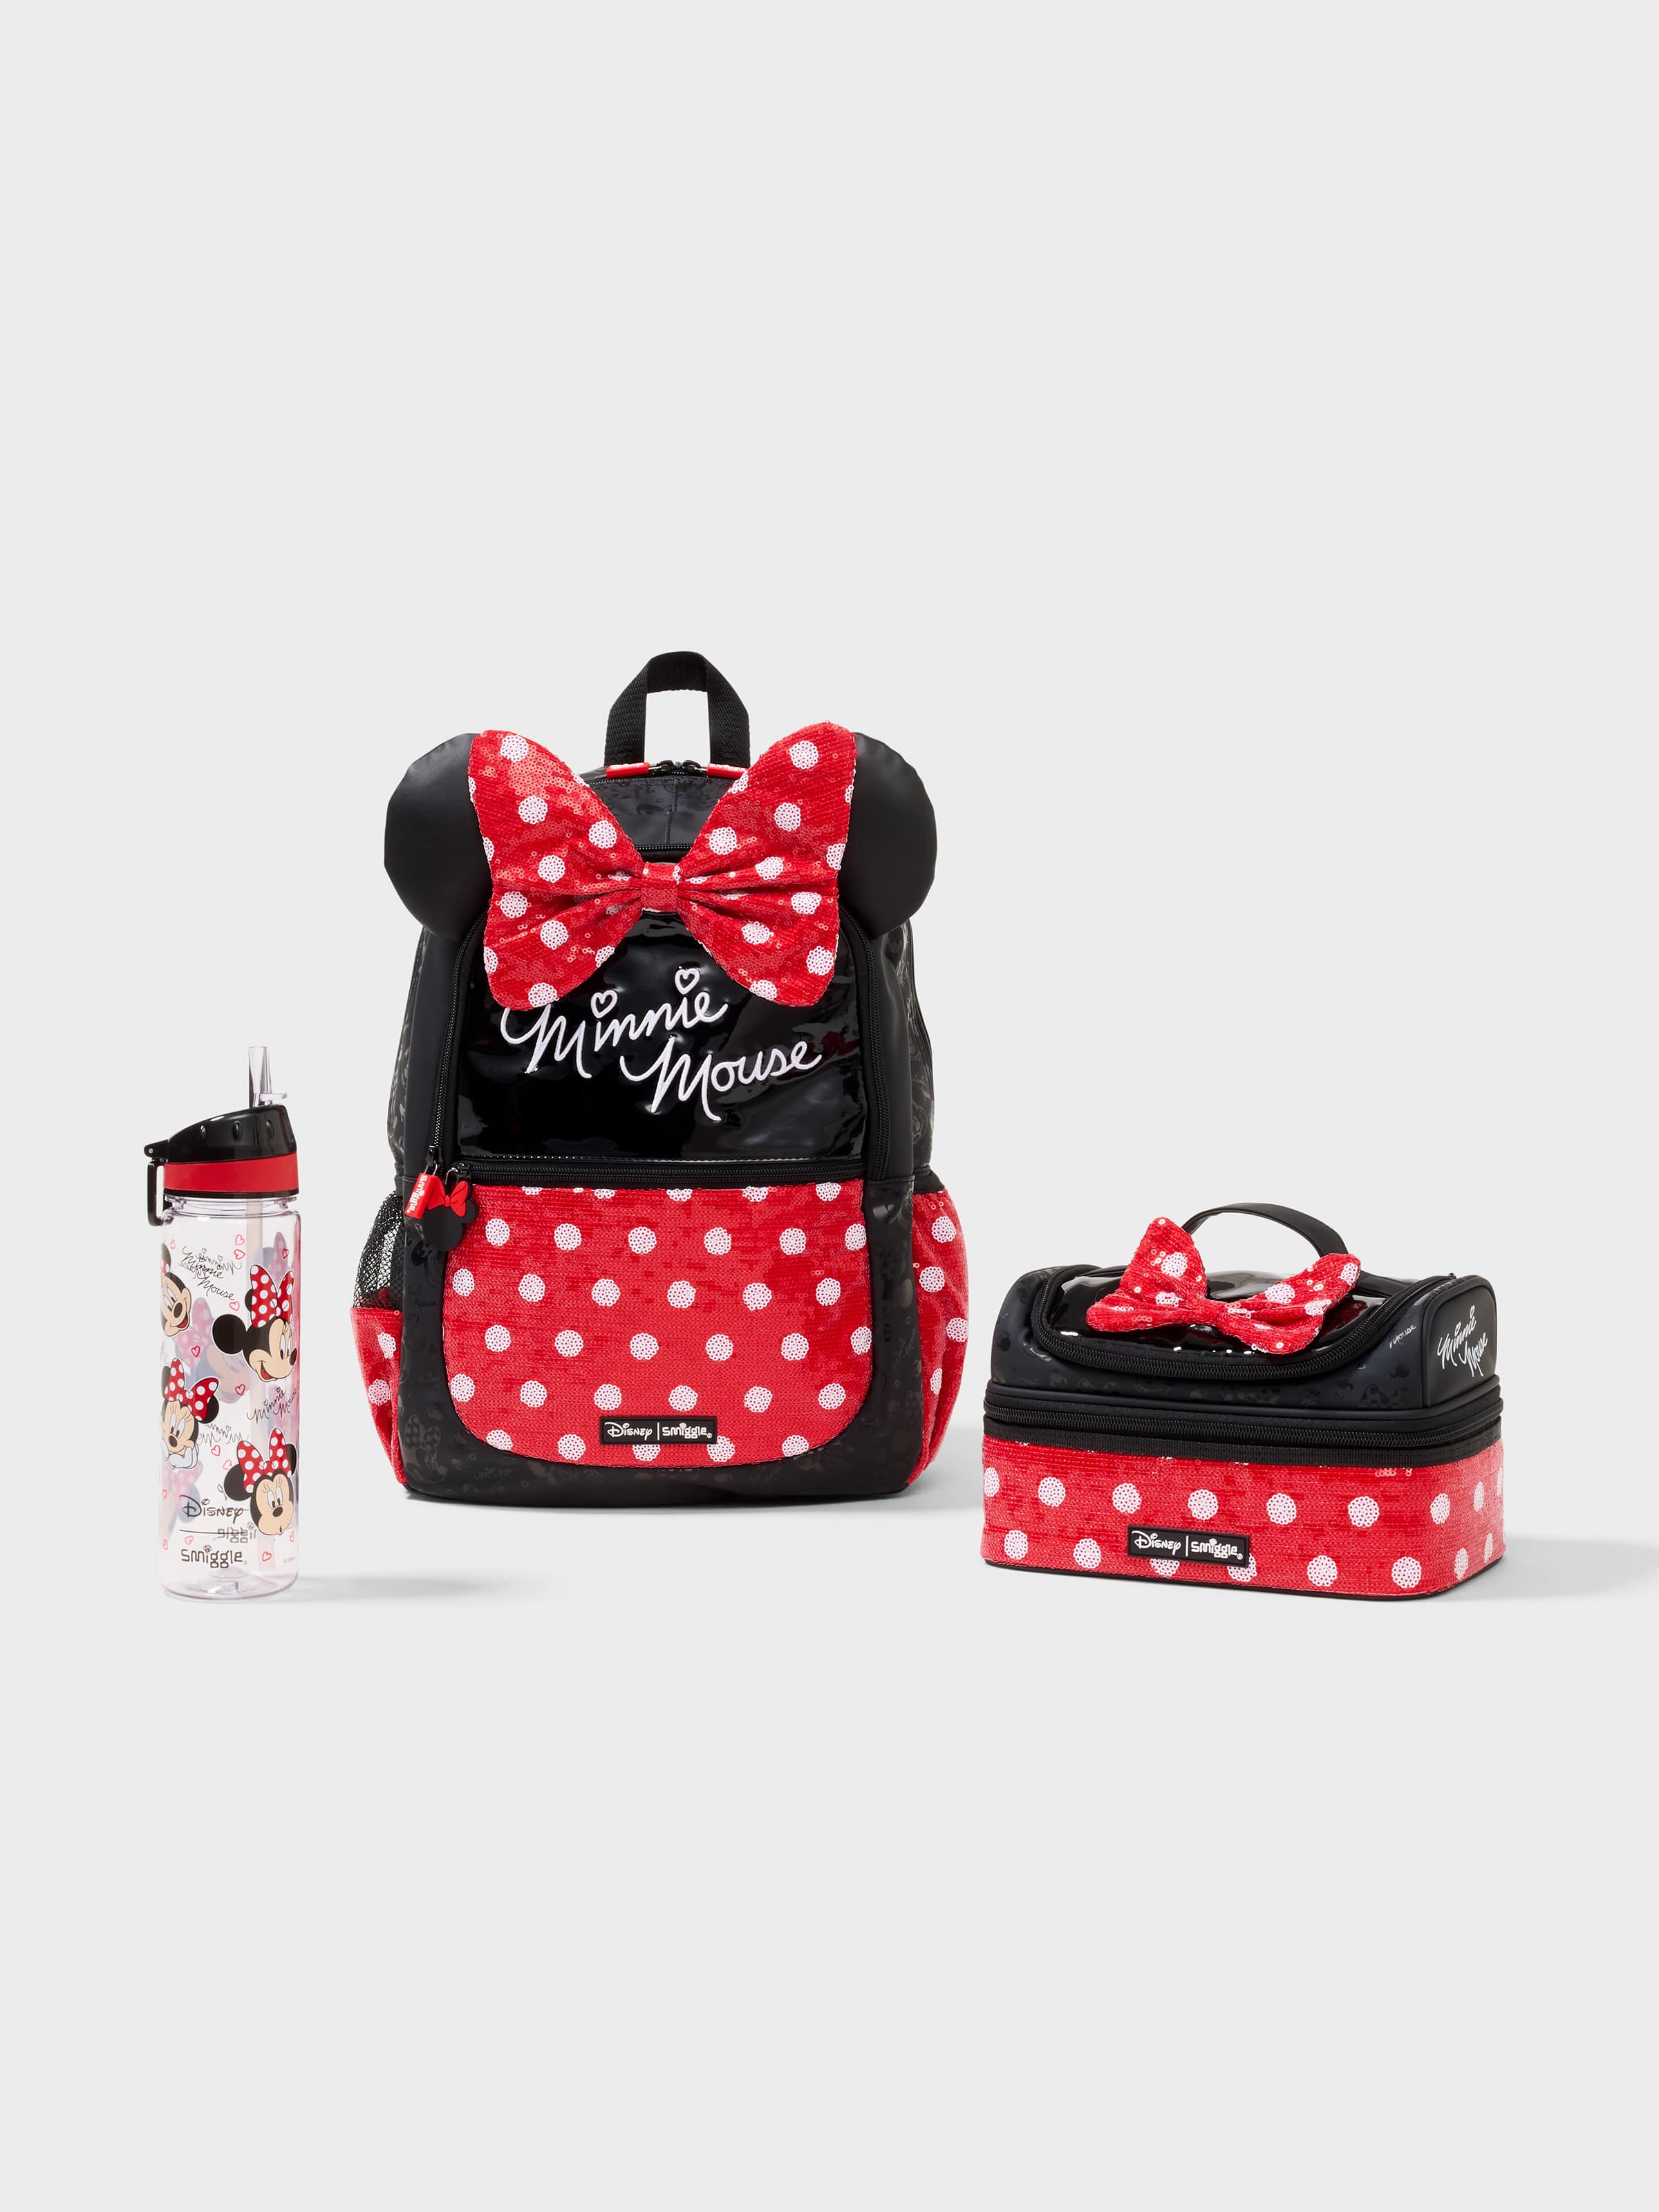 Minnie Mouse Official 3 Piece Lunch Bag with Sandwich Lunch Box